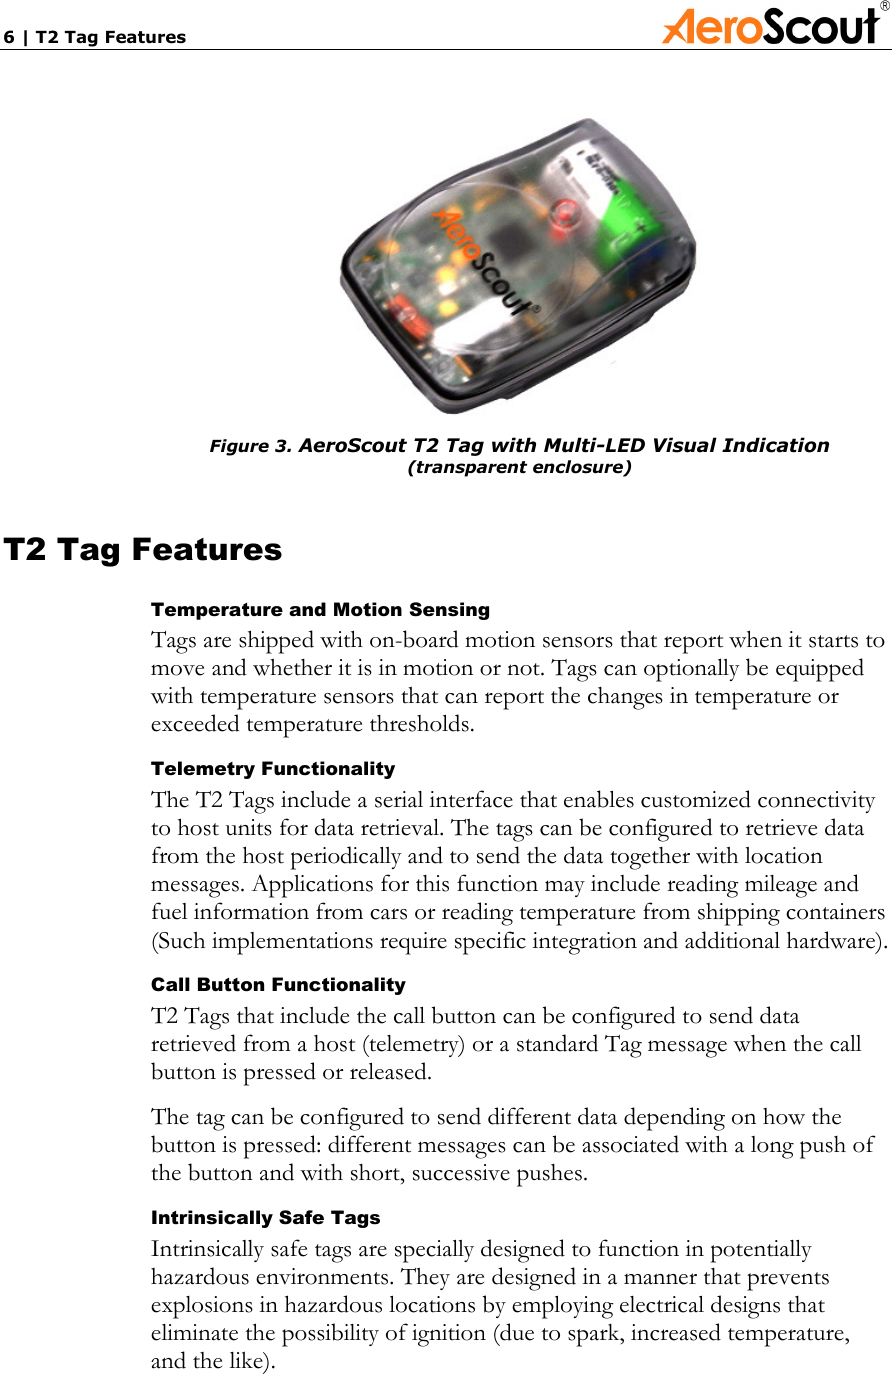 6 | T2 Tag Features              Figure 3. AeroScout T2 Tag with Multi-LED Visual Indication (transparent enclosure)  T2 Tag Features Temperature and Motion Sensing Tags are shipped with on-board motion sensors that report when it starts to move and whether it is in motion or not. Tags can optionally be equipped with temperature sensors that can report the changes in temperature or exceeded temperature thresholds. Telemetry Functionality The T2 Tags include a serial interface that enables customized connectivity to host units for data retrieval. The tags can be configured to retrieve data from the host periodically and to send the data together with location messages. Applications for this function may include reading mileage and fuel information from cars or reading temperature from shipping containers (Such implementations require specific integration and additional hardware). Call Button Functionality T2 Tags that include the call button can be configured to send data retrieved from a host (telemetry) or a standard Tag message when the call button is pressed or released. The tag can be configured to send different data depending on how the button is pressed: different messages can be associated with a long push of the button and with short, successive pushes. Intrinsically Safe Tags Intrinsically safe tags are specially designed to function in potentially hazardous environments. They are designed in a manner that prevents explosions in hazardous locations by employing electrical designs that eliminate the possibility of ignition (due to spark, increased temperature, and the like).  